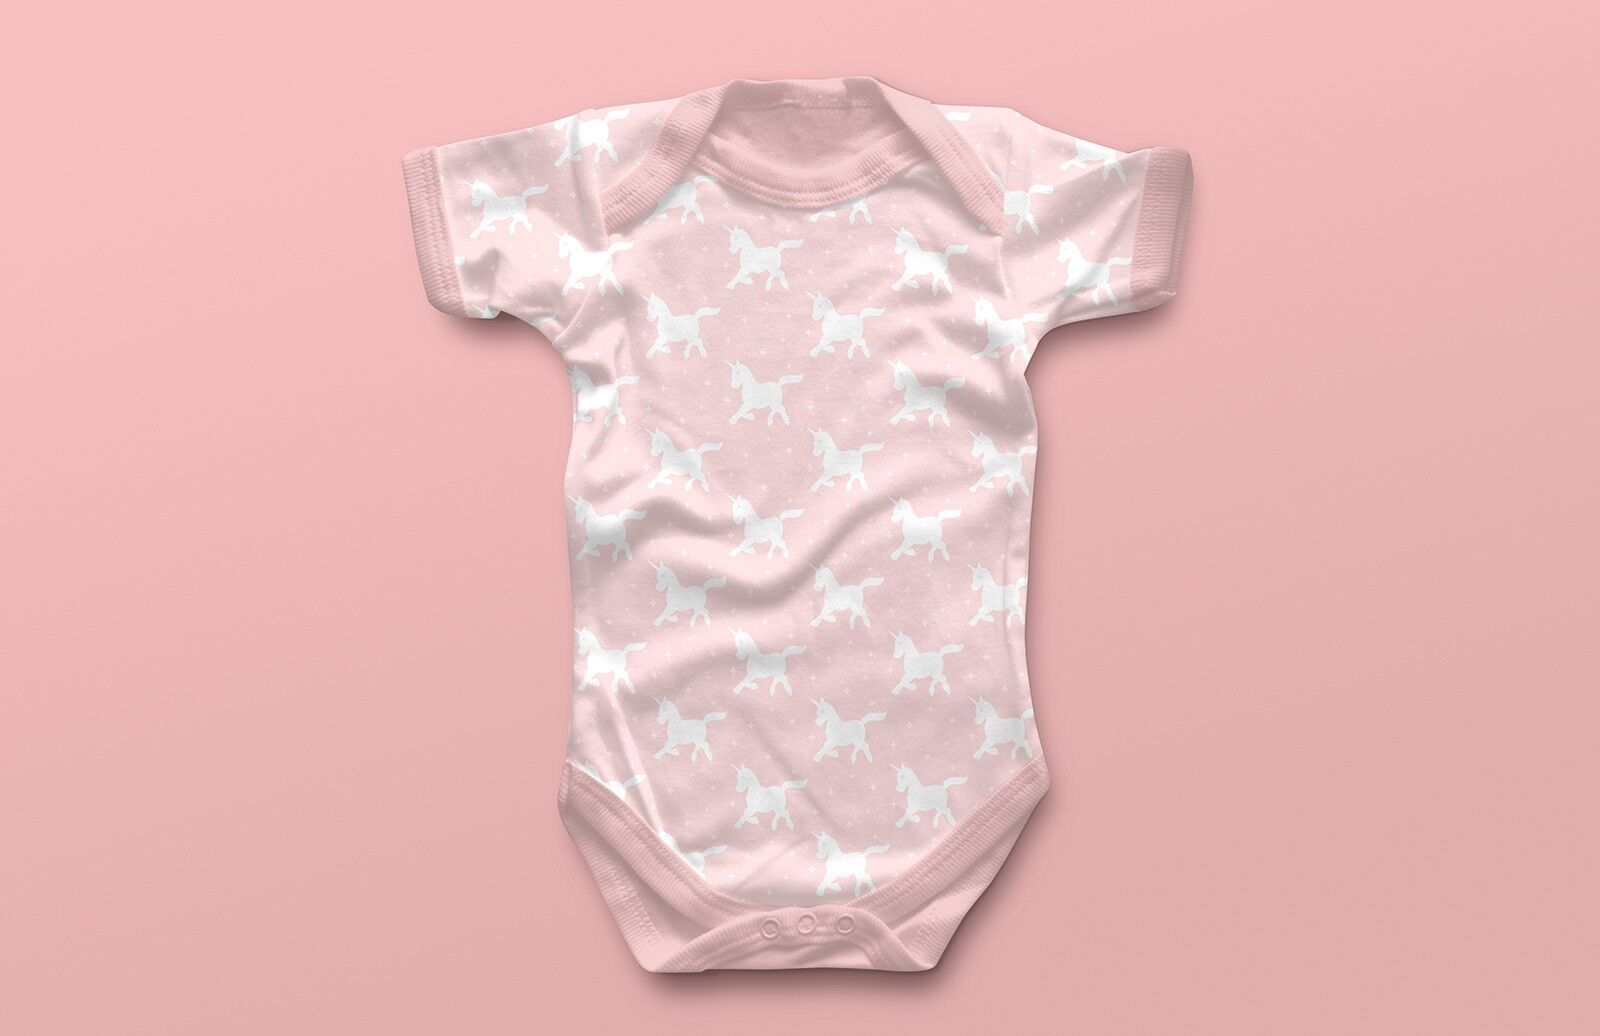 Mockup Featuring a Baby Grow Sleepsuit FREE PSD